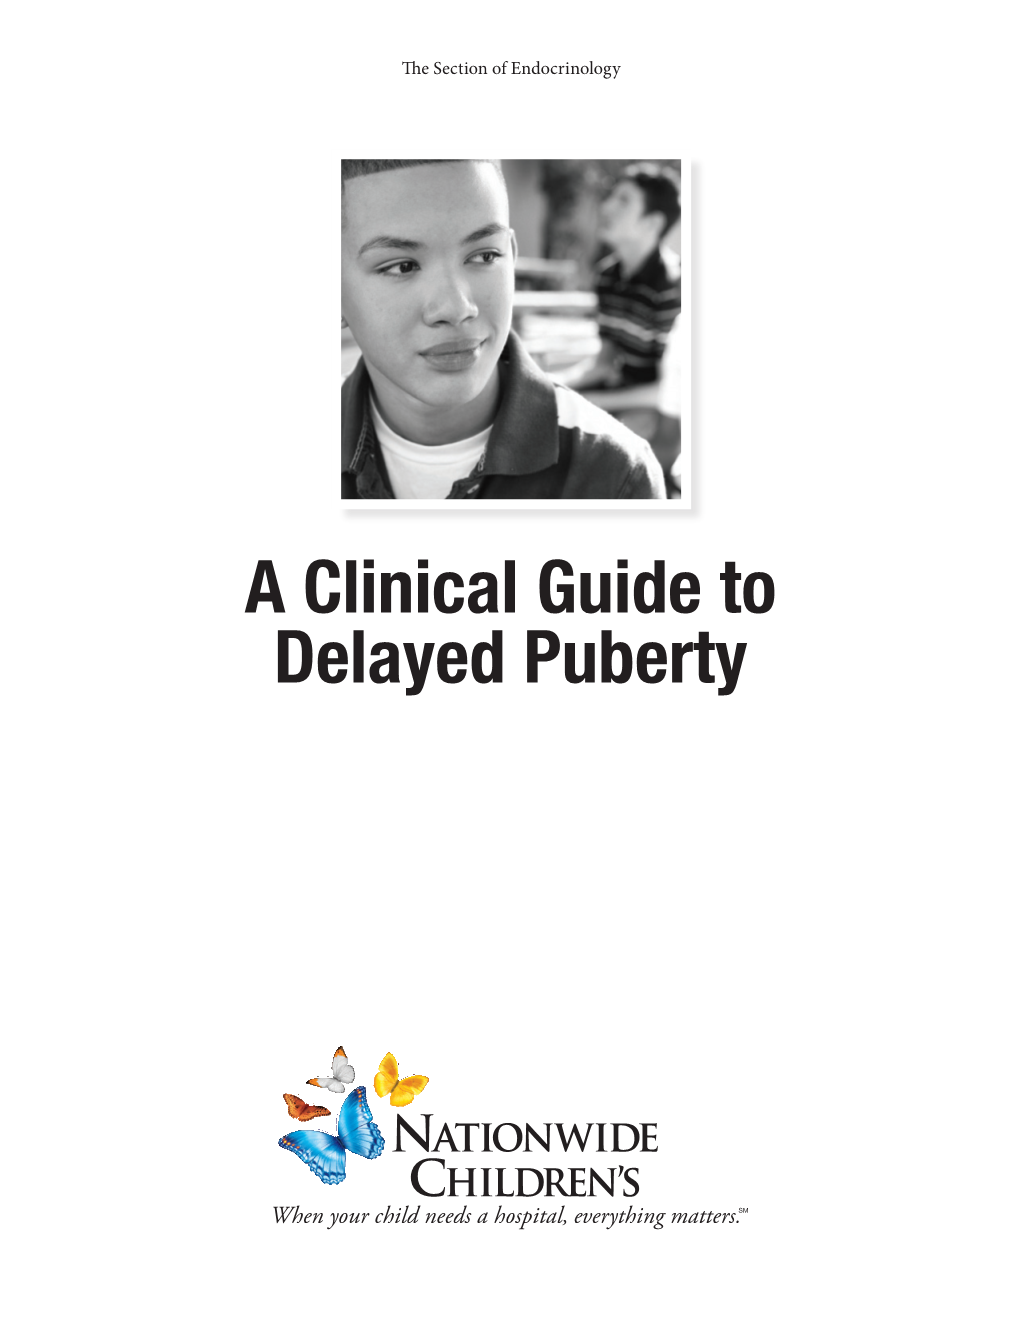 A Clinical Guide to Delayed Puberty